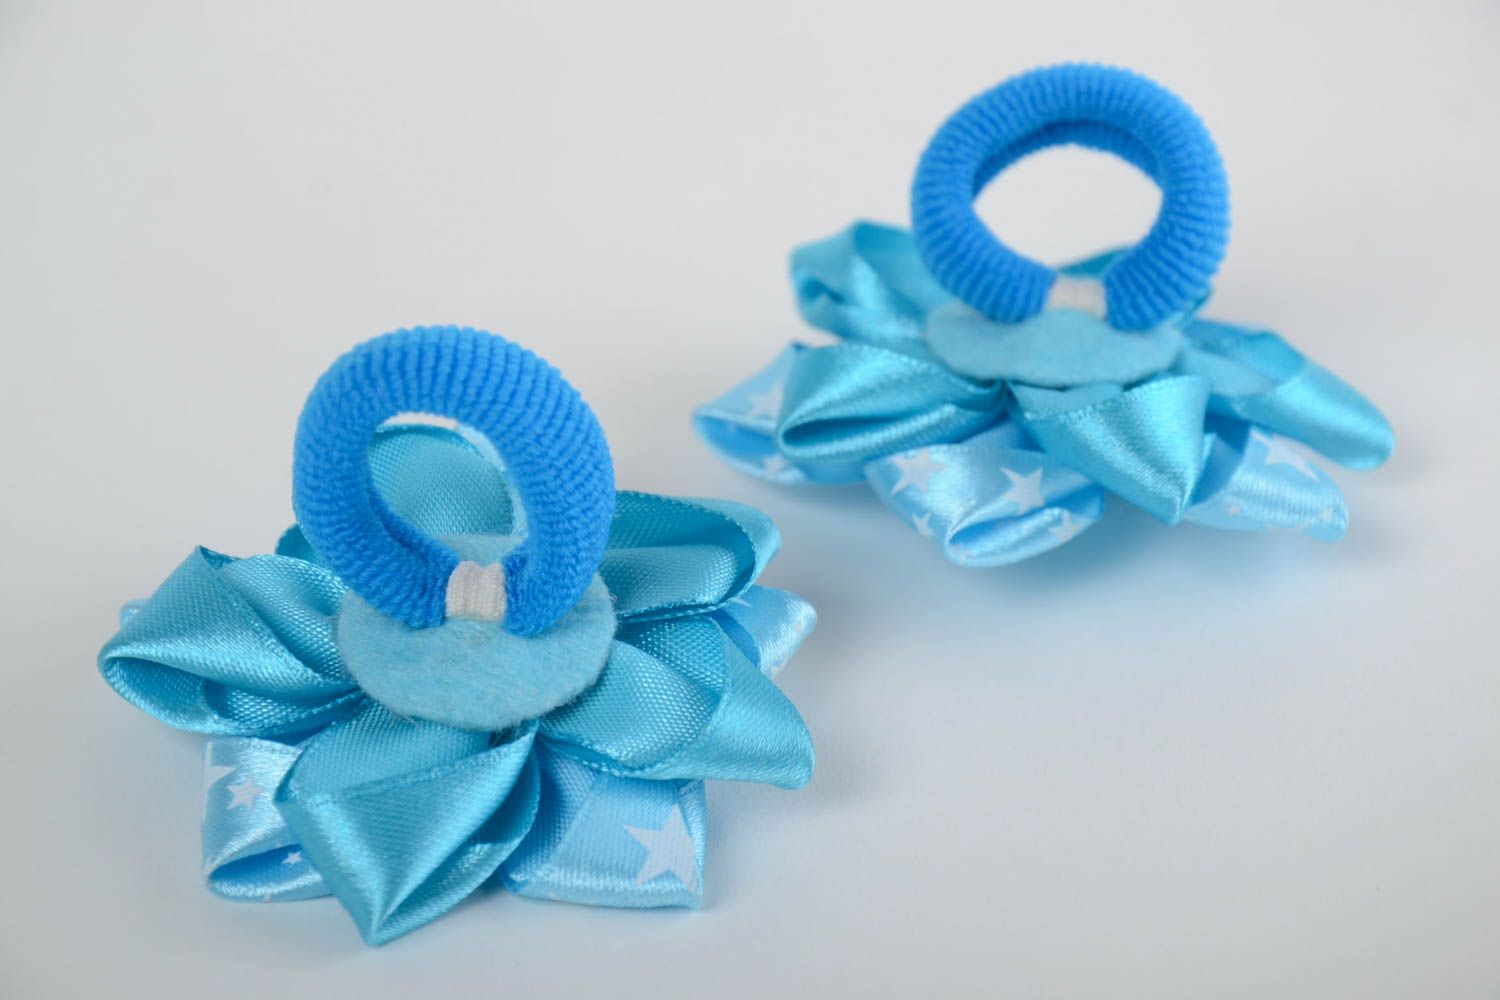 Handmade blue hair ties with flowers of satin ribbons for kids 2 pieces photo 3